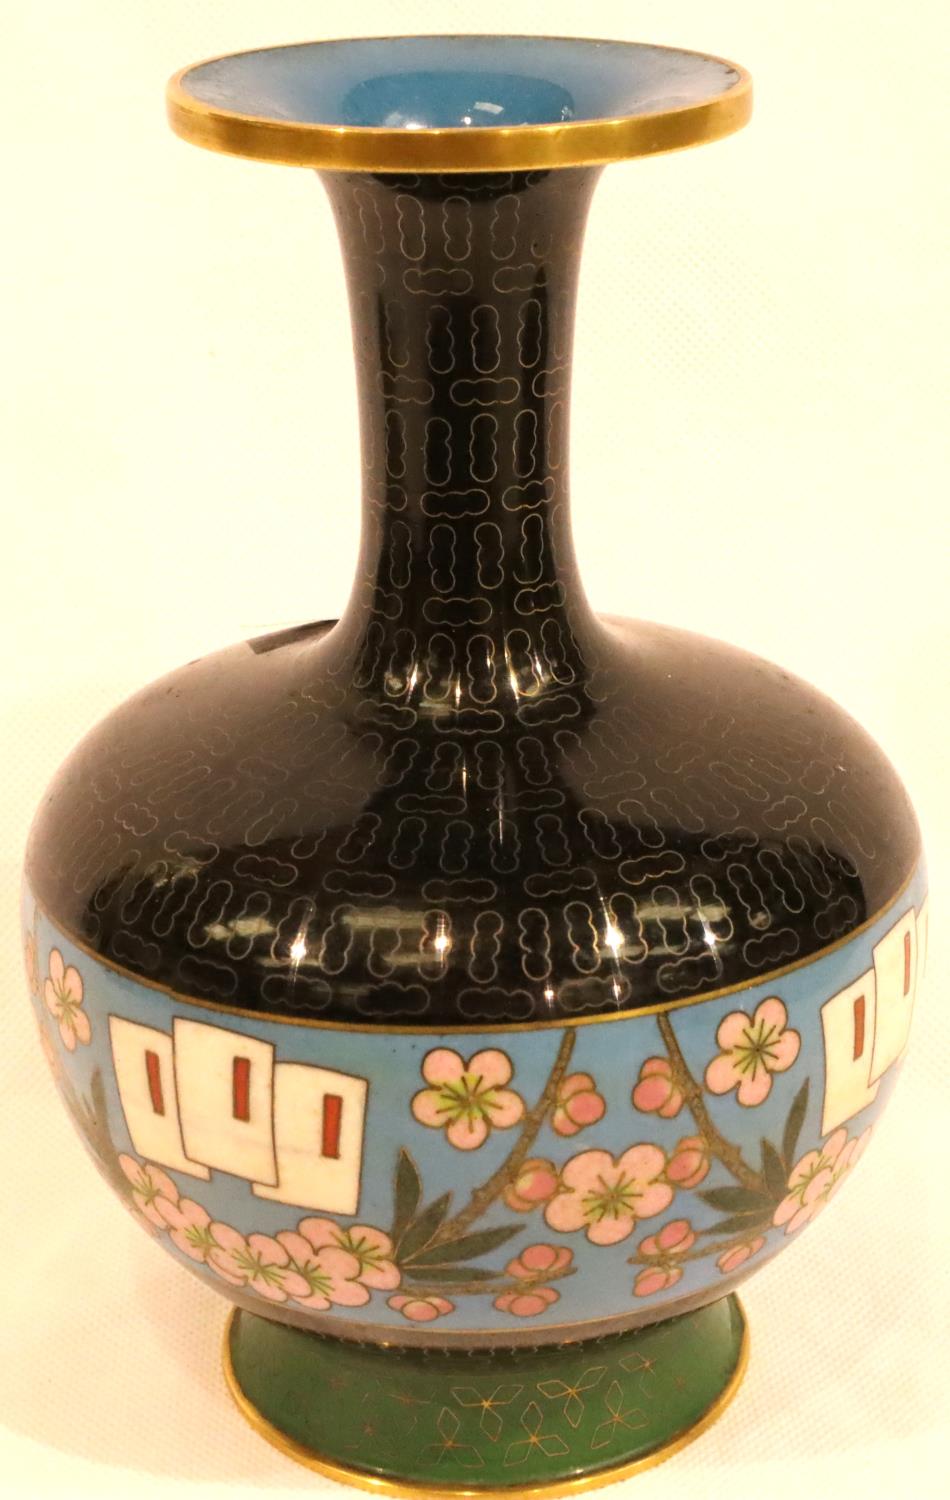 Chinese cloisonne ornate vase, H: 18 cm. P&P Group 2 (£18+VAT for the first lot and £3+VAT for